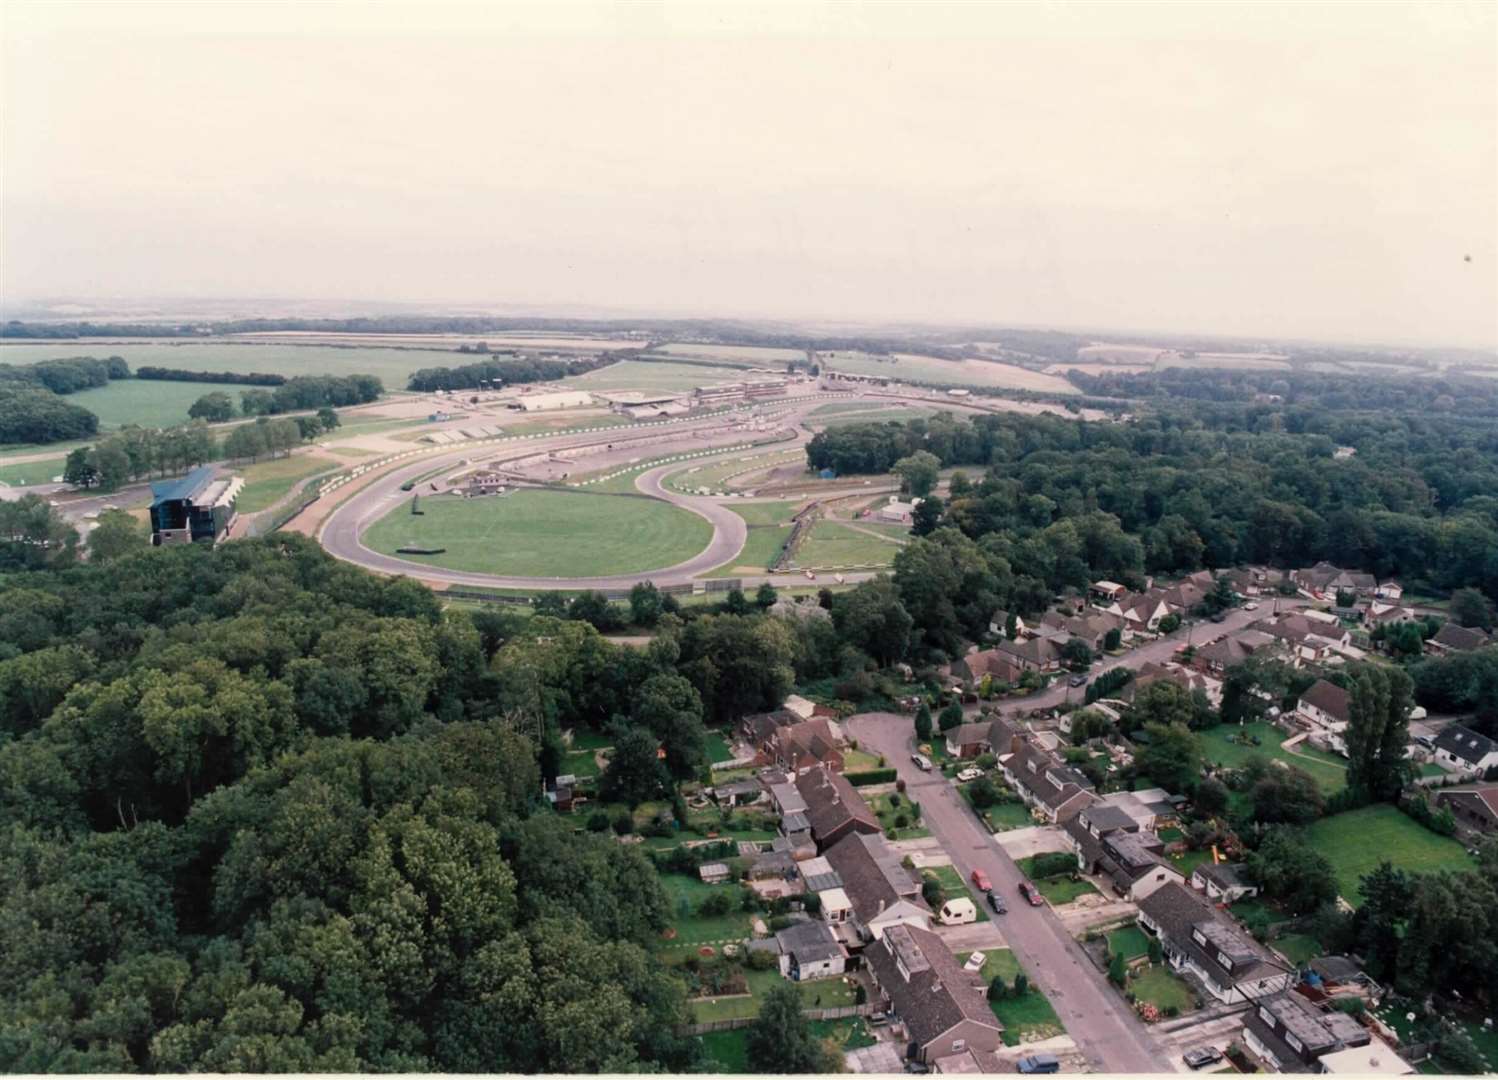 The view of Brands Hatch in 1992 and the neighbouring village of West Kingsdown